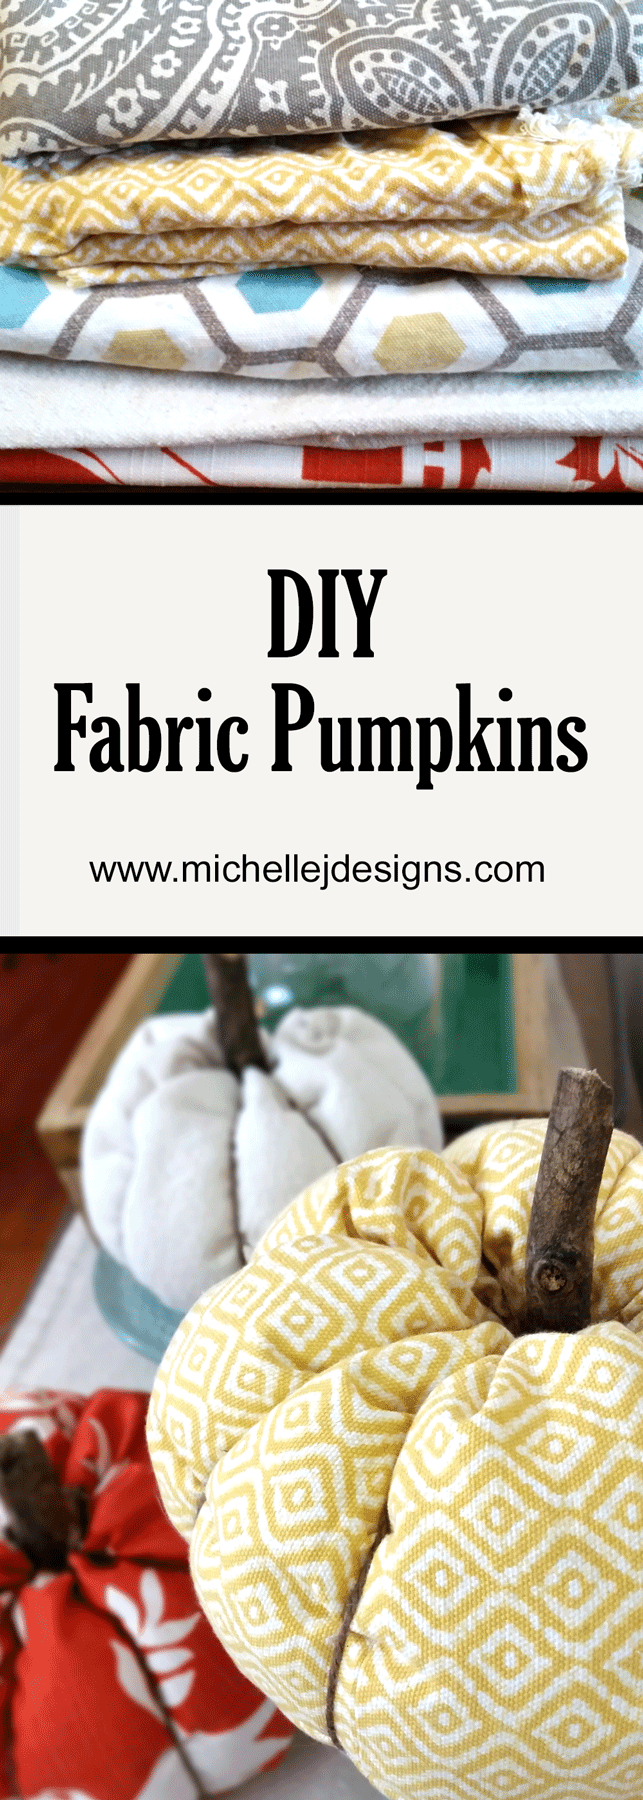 DIY Fabric Pumpkins are easy to make and don't require a lot of supplies. I love to decorate for fall and pumpkins are a great home decor. This year I thought I would ease into the fall season a bit and create some different DIY Fabric Pumpkins. They turned out so cute! - www.michellejdesigns.com